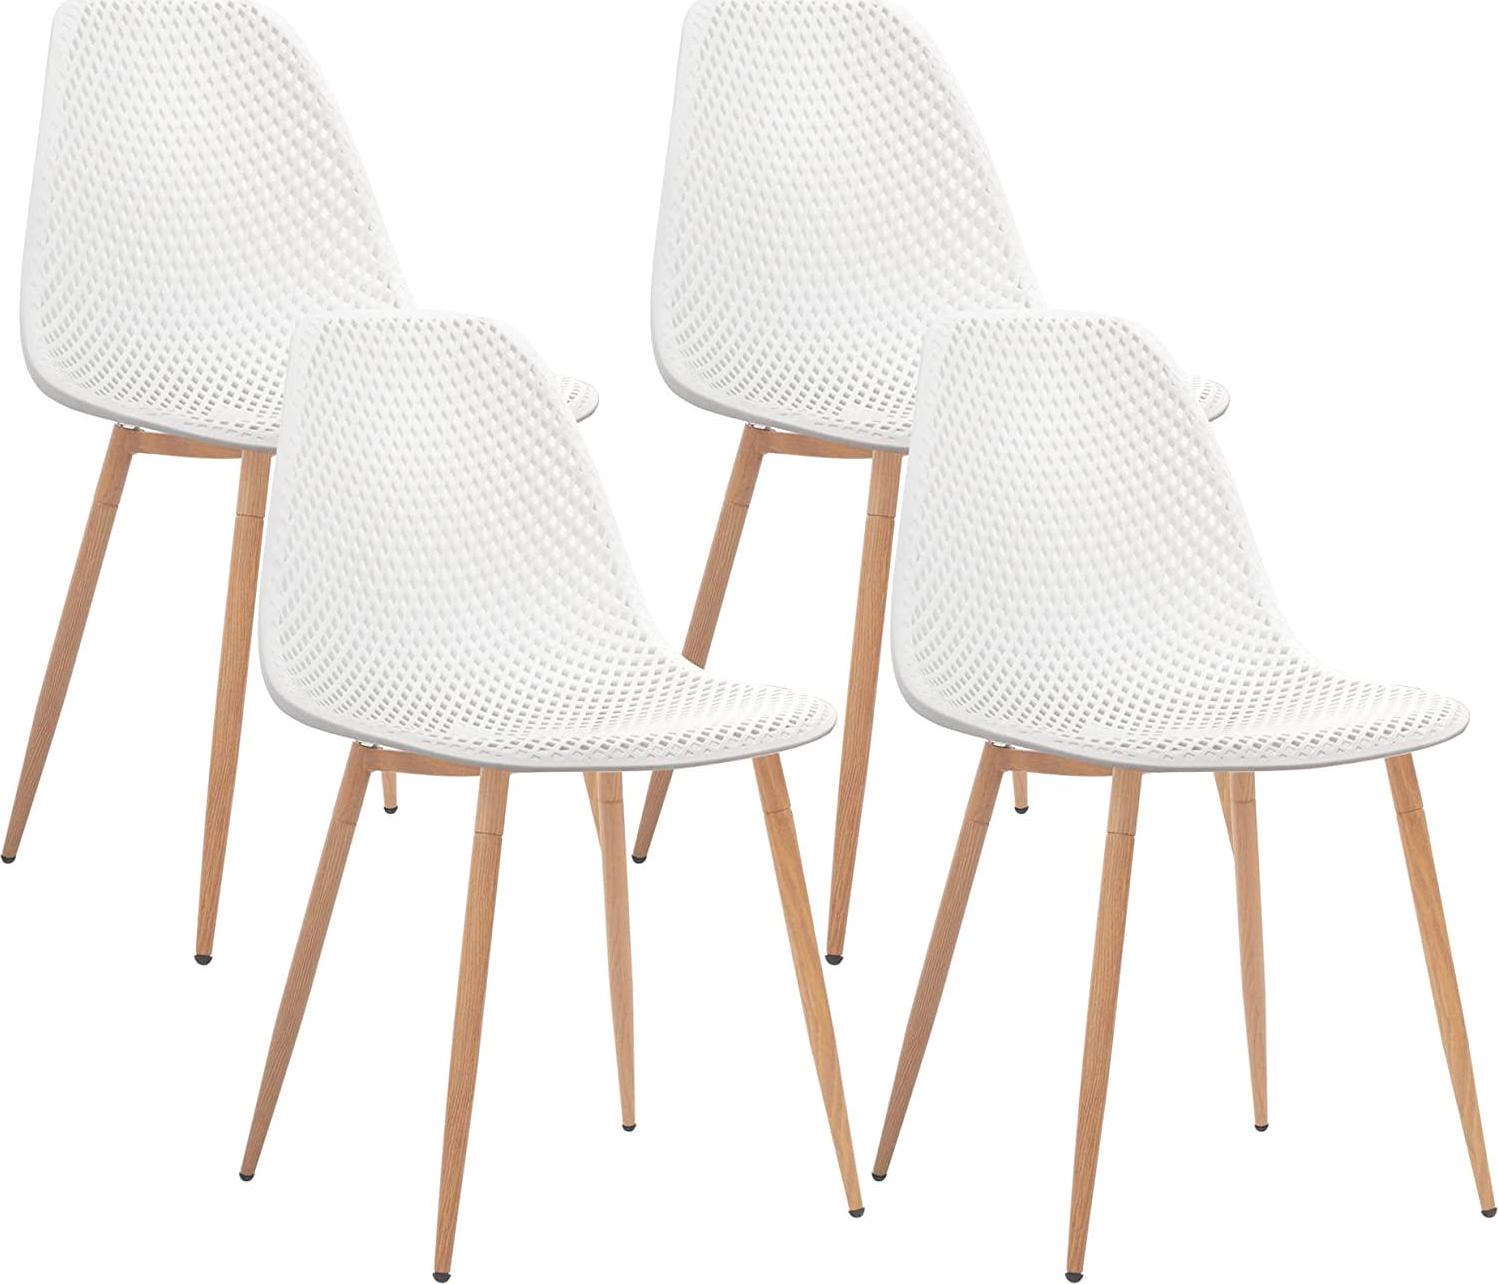 CangLong Dining Mid Century Modern DSW Hollow Back Design Plastic Shell Armless Side Chair with Metal Legs, Set of 4, White-